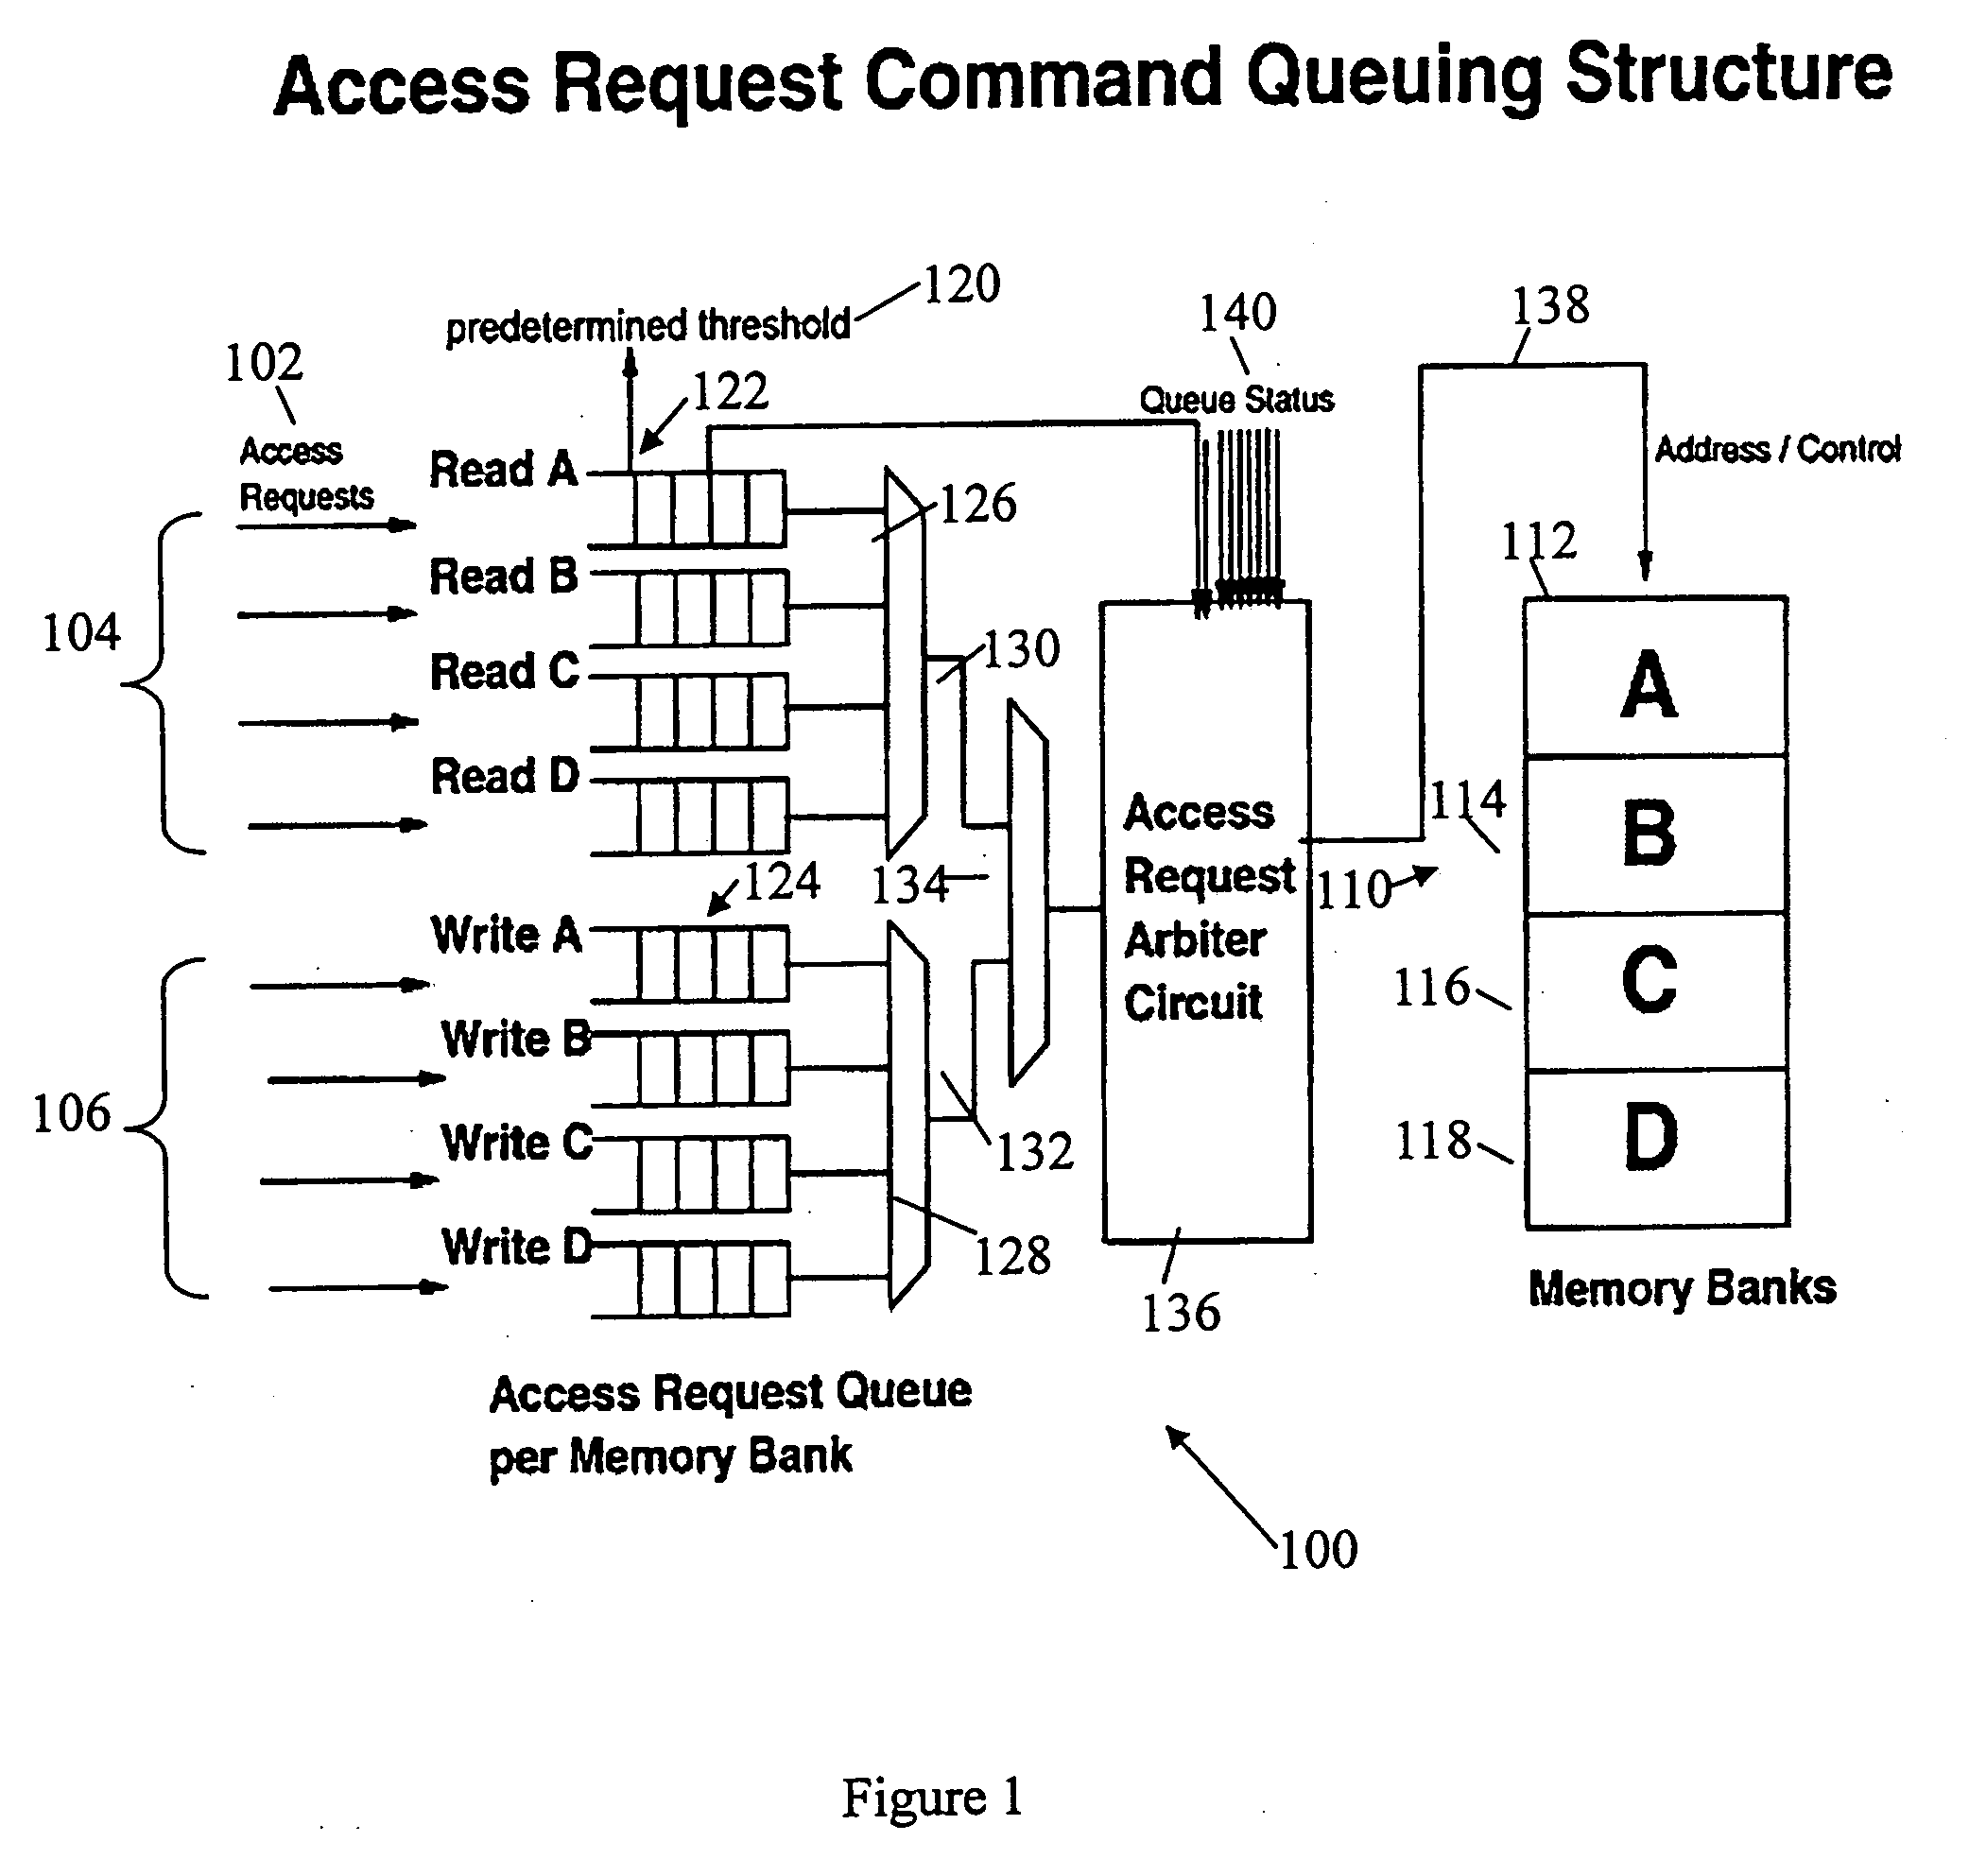 DRAM access command queuing structure